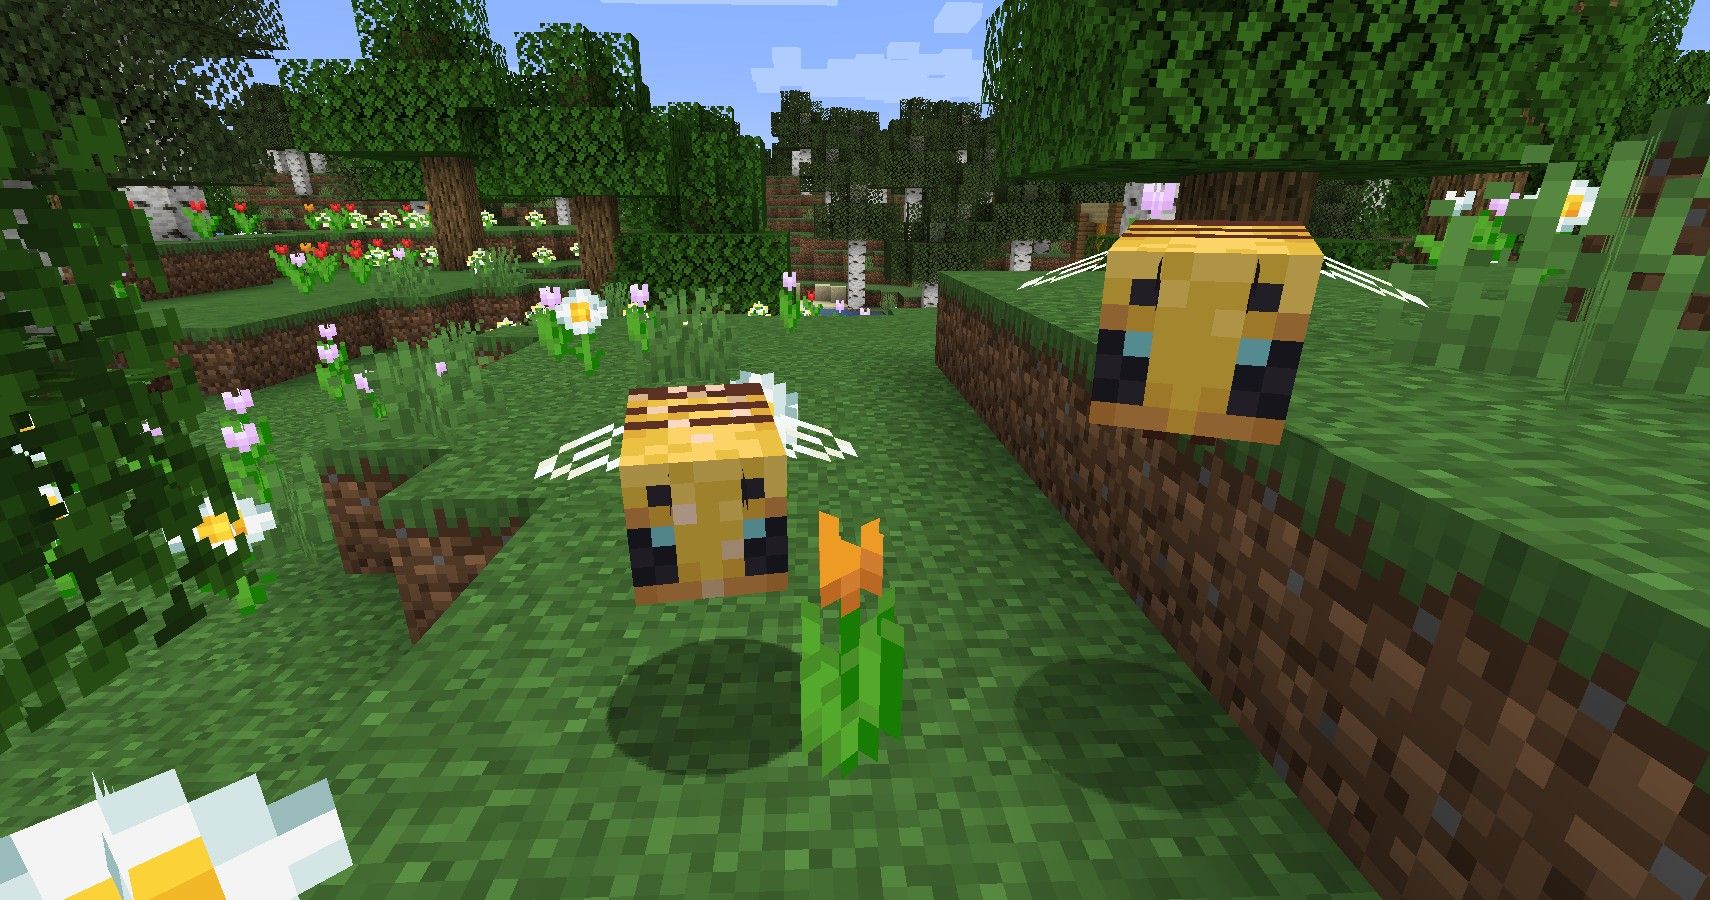 bees in Minecraft following player with flower